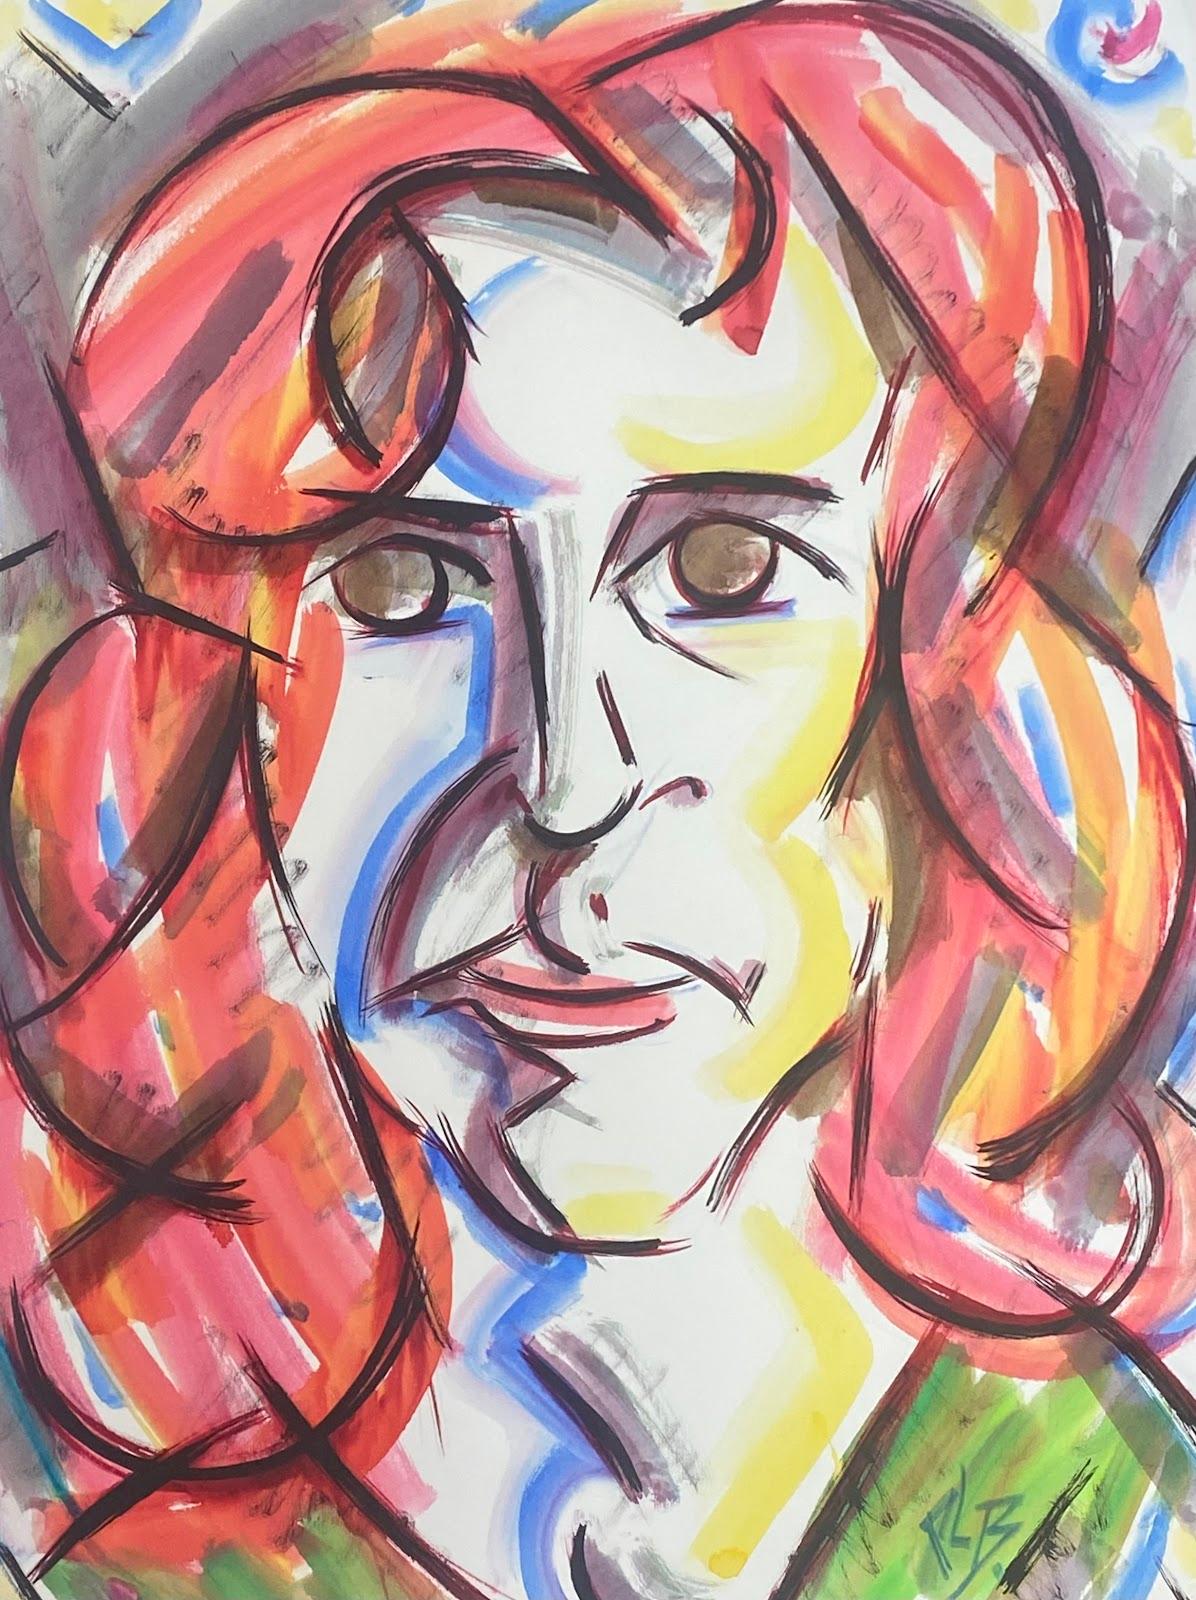 Paul-Louis Bolot (French 1918-2003) Figurative Painting - French Painting Abstract Colorful Portrait Of Red-Haired Woman